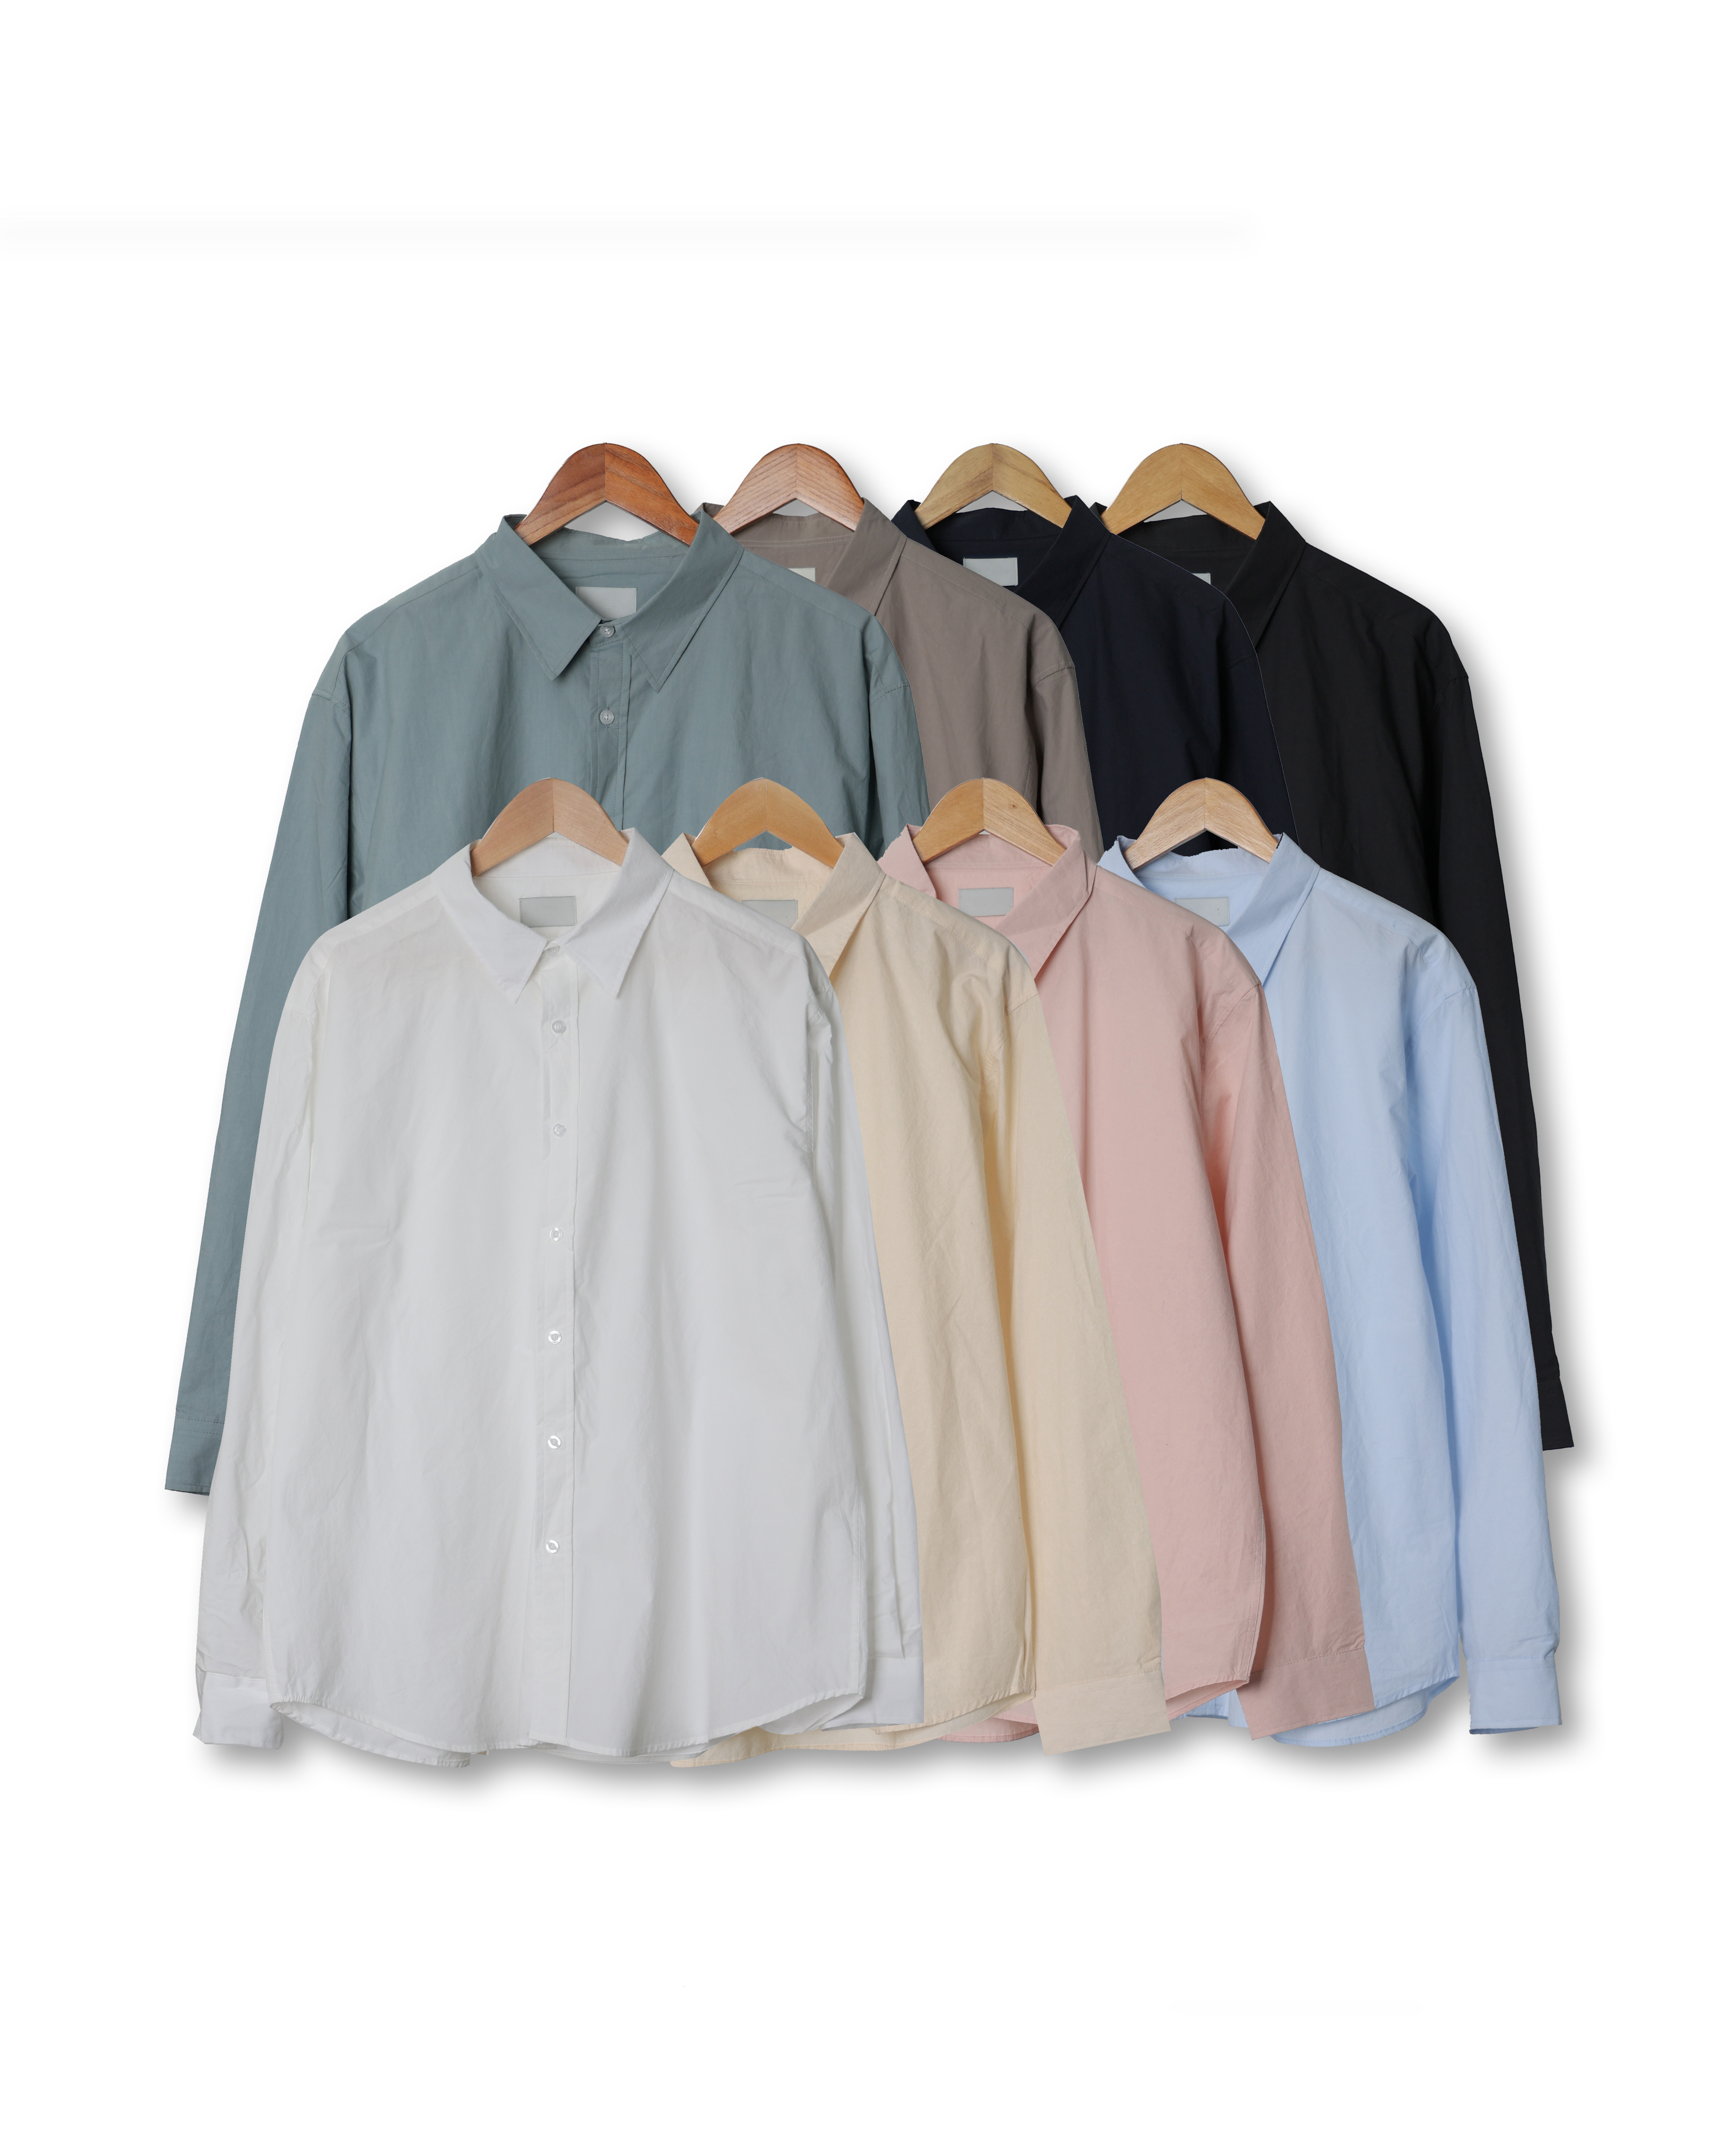 FREKS Modern Over Wide Daily Shirts (Charcoal/Navy/Deep Beige/Mint/Sky Blue/Pink/Cream/White)